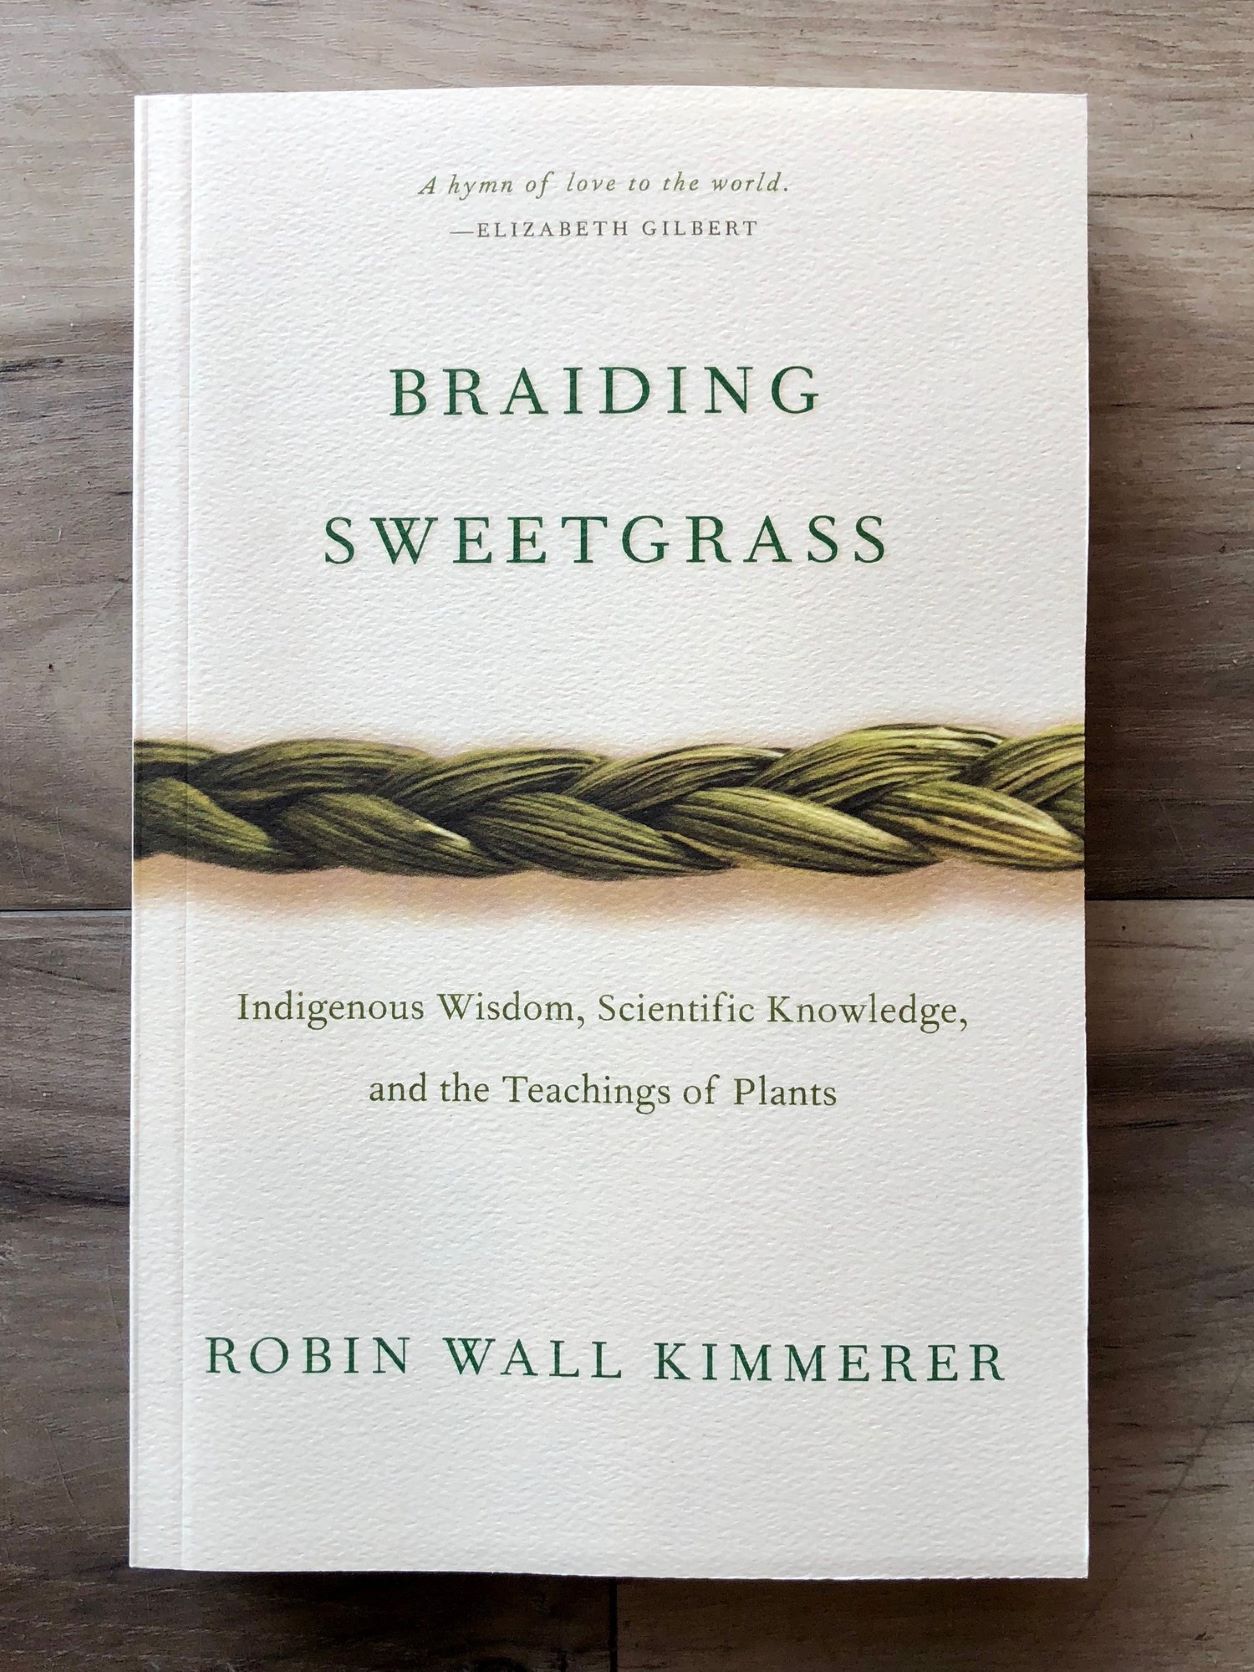 Book cover for Robin Wall Kimmerer's Braiding Sweetgrass. Book cover is on a white background, and a braid of sweetgrass is featured horizontally across the center of the page.